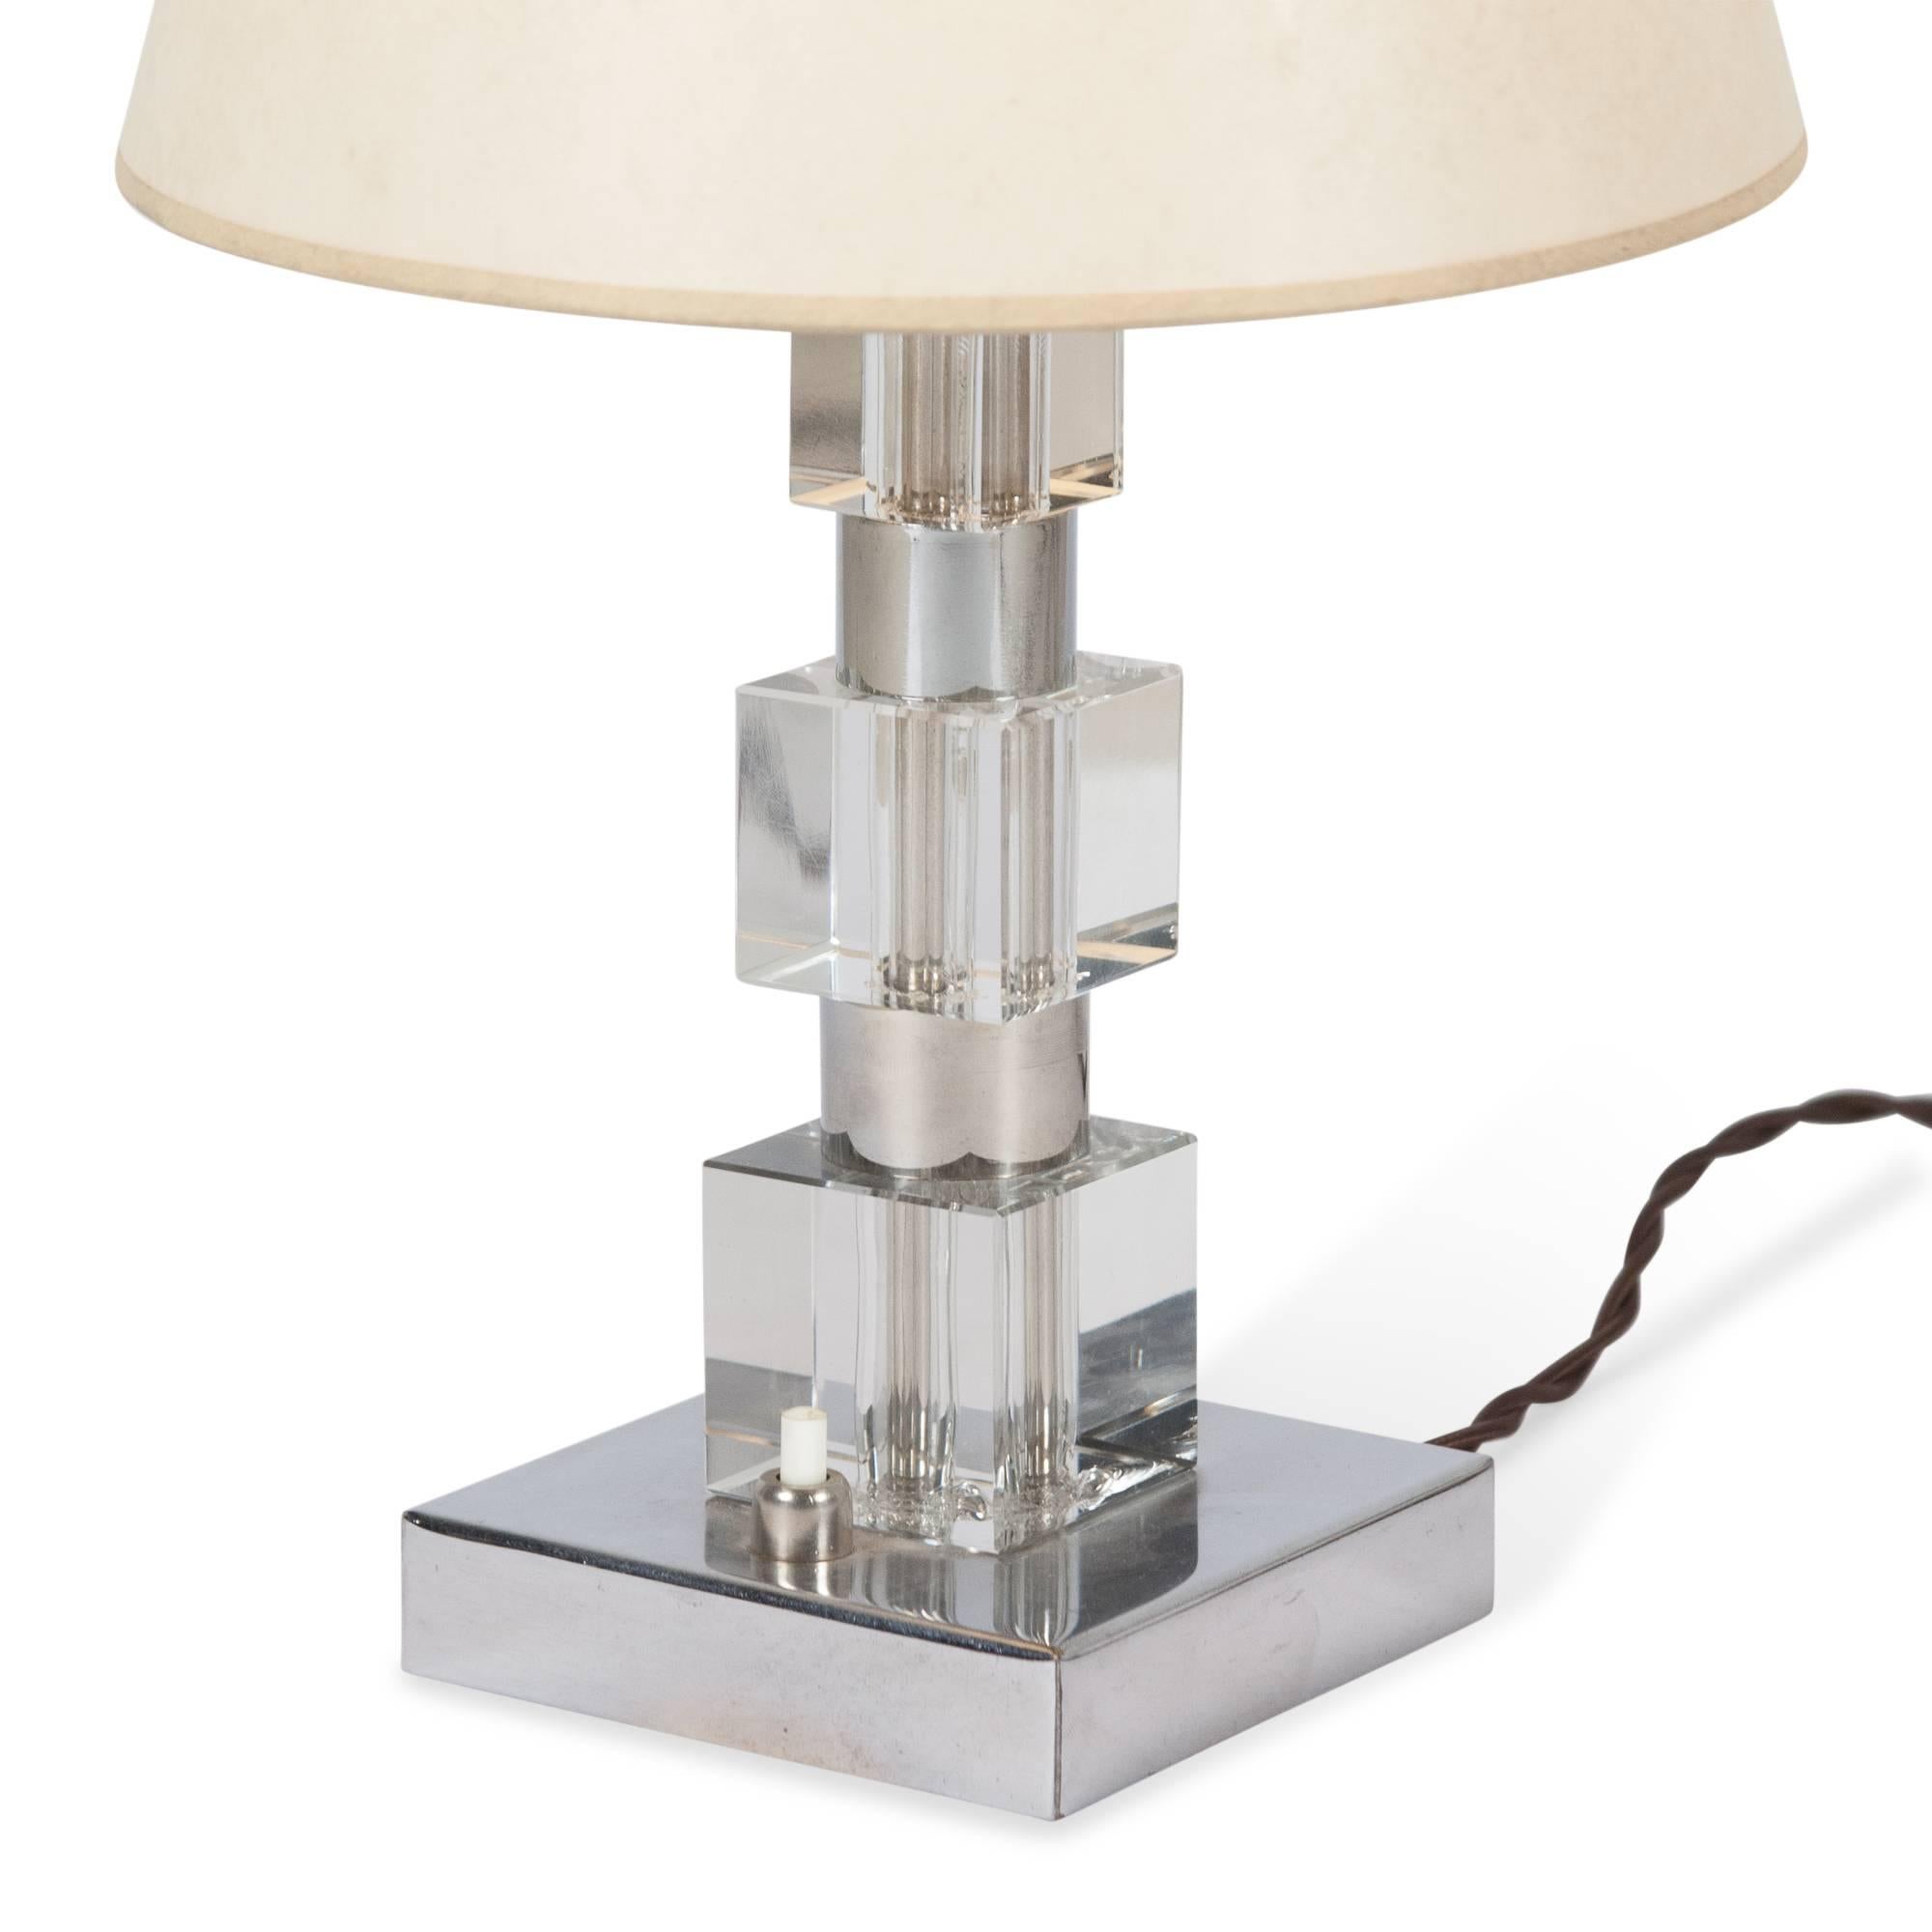 Mid-20th Century Chrome and Glass Desk Lamp, French, 1930s For Sale